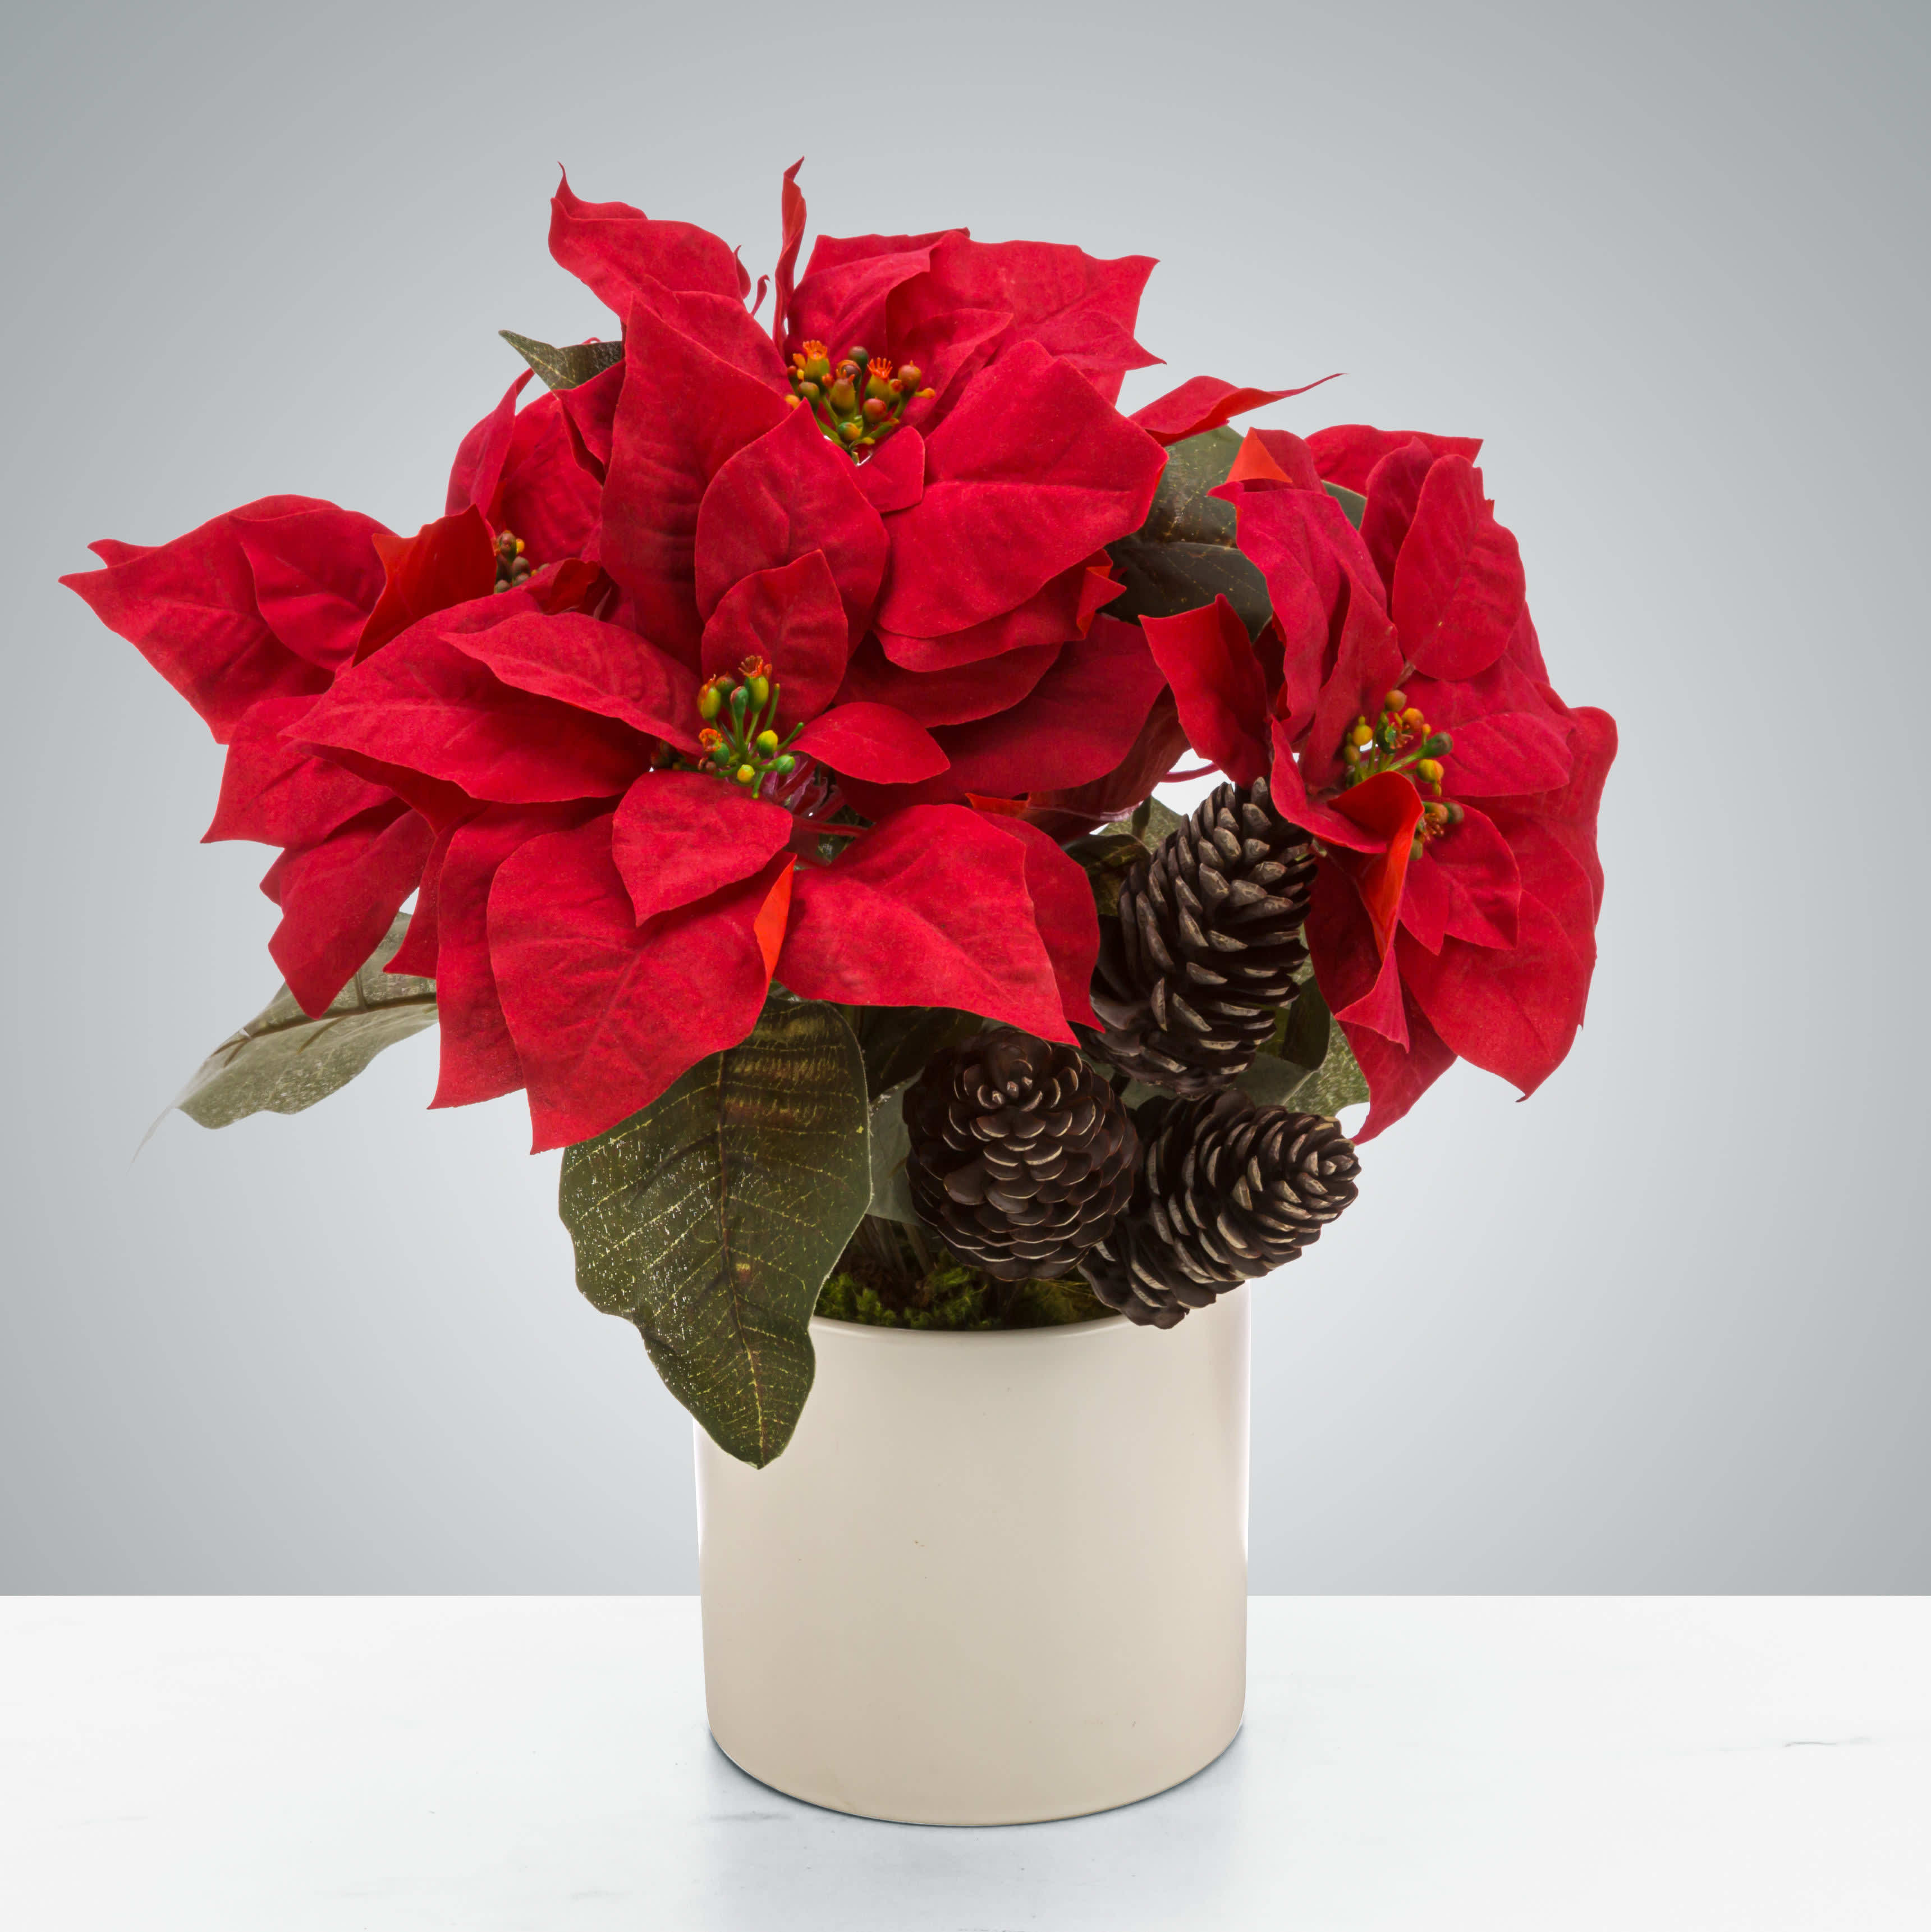 Poinsettia Plant by BloomNation™ - Happy Holidays! A classic holiday plant, the poinsettia plants vibrant color brings some cheer to any room. A perfect Christmas present for any relation.